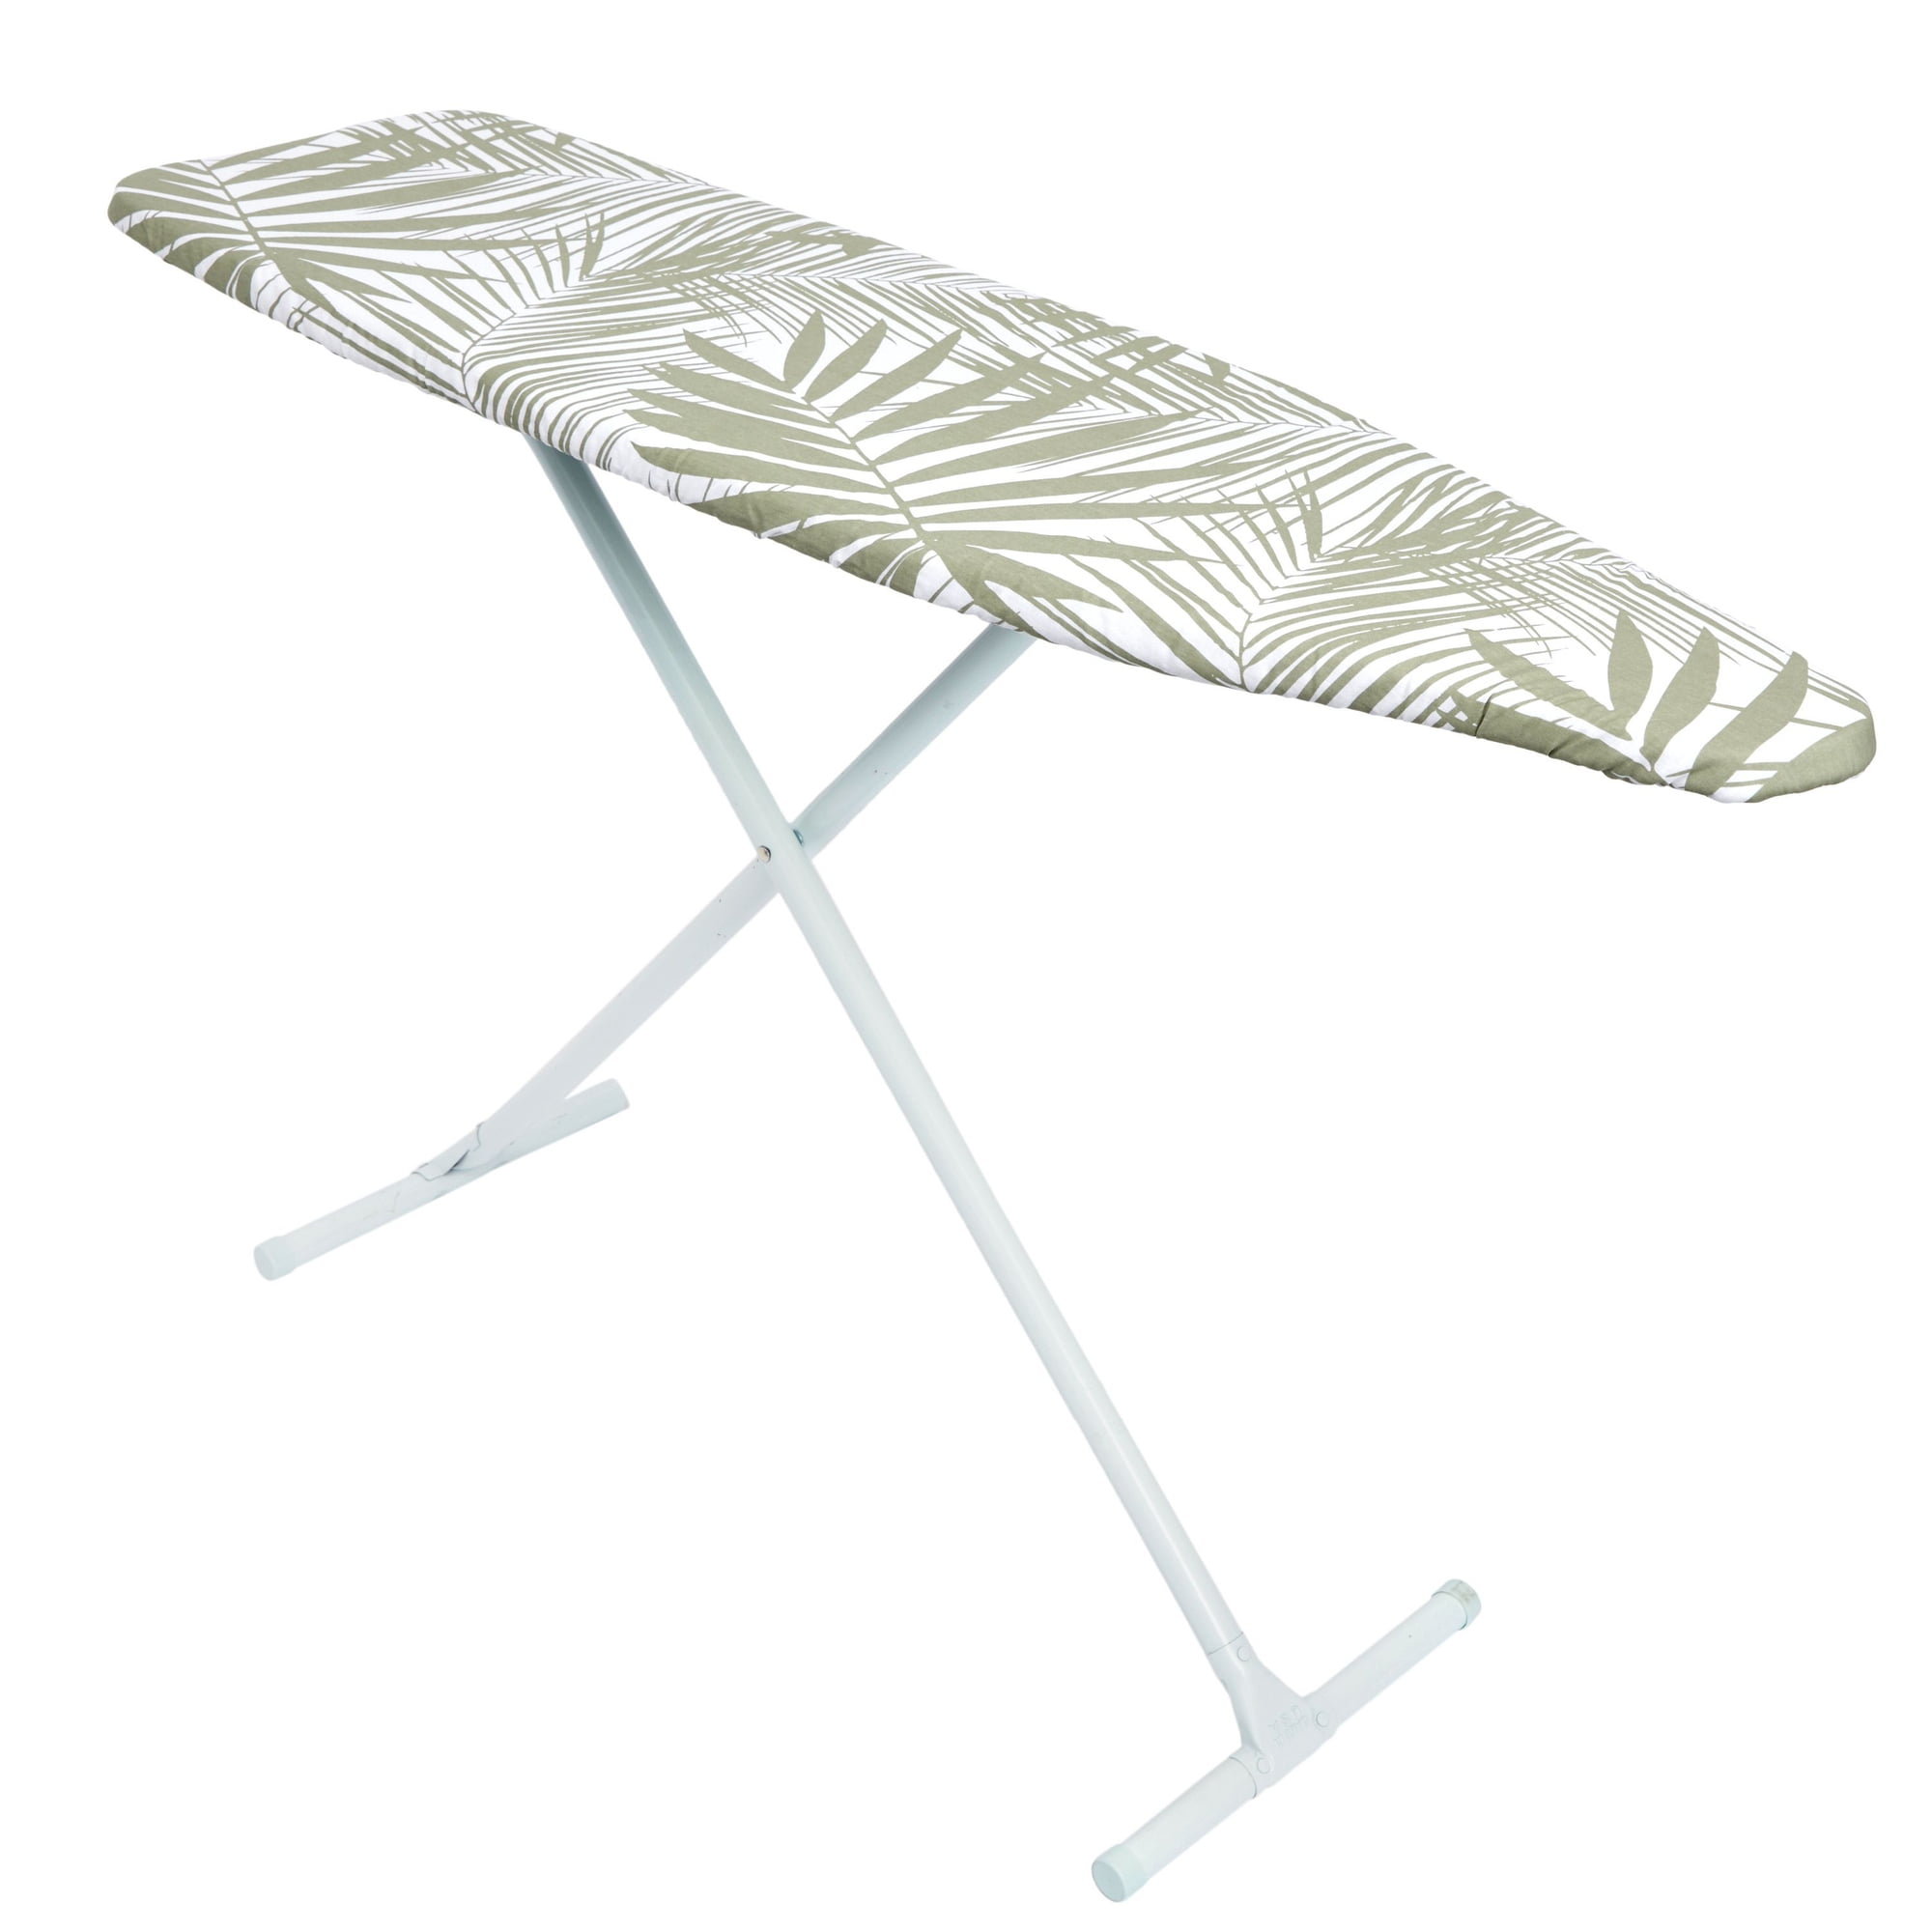 Juvale Ironing Board Cover and Pad, Heavy Duty, Floral Print (15 x 54 in)